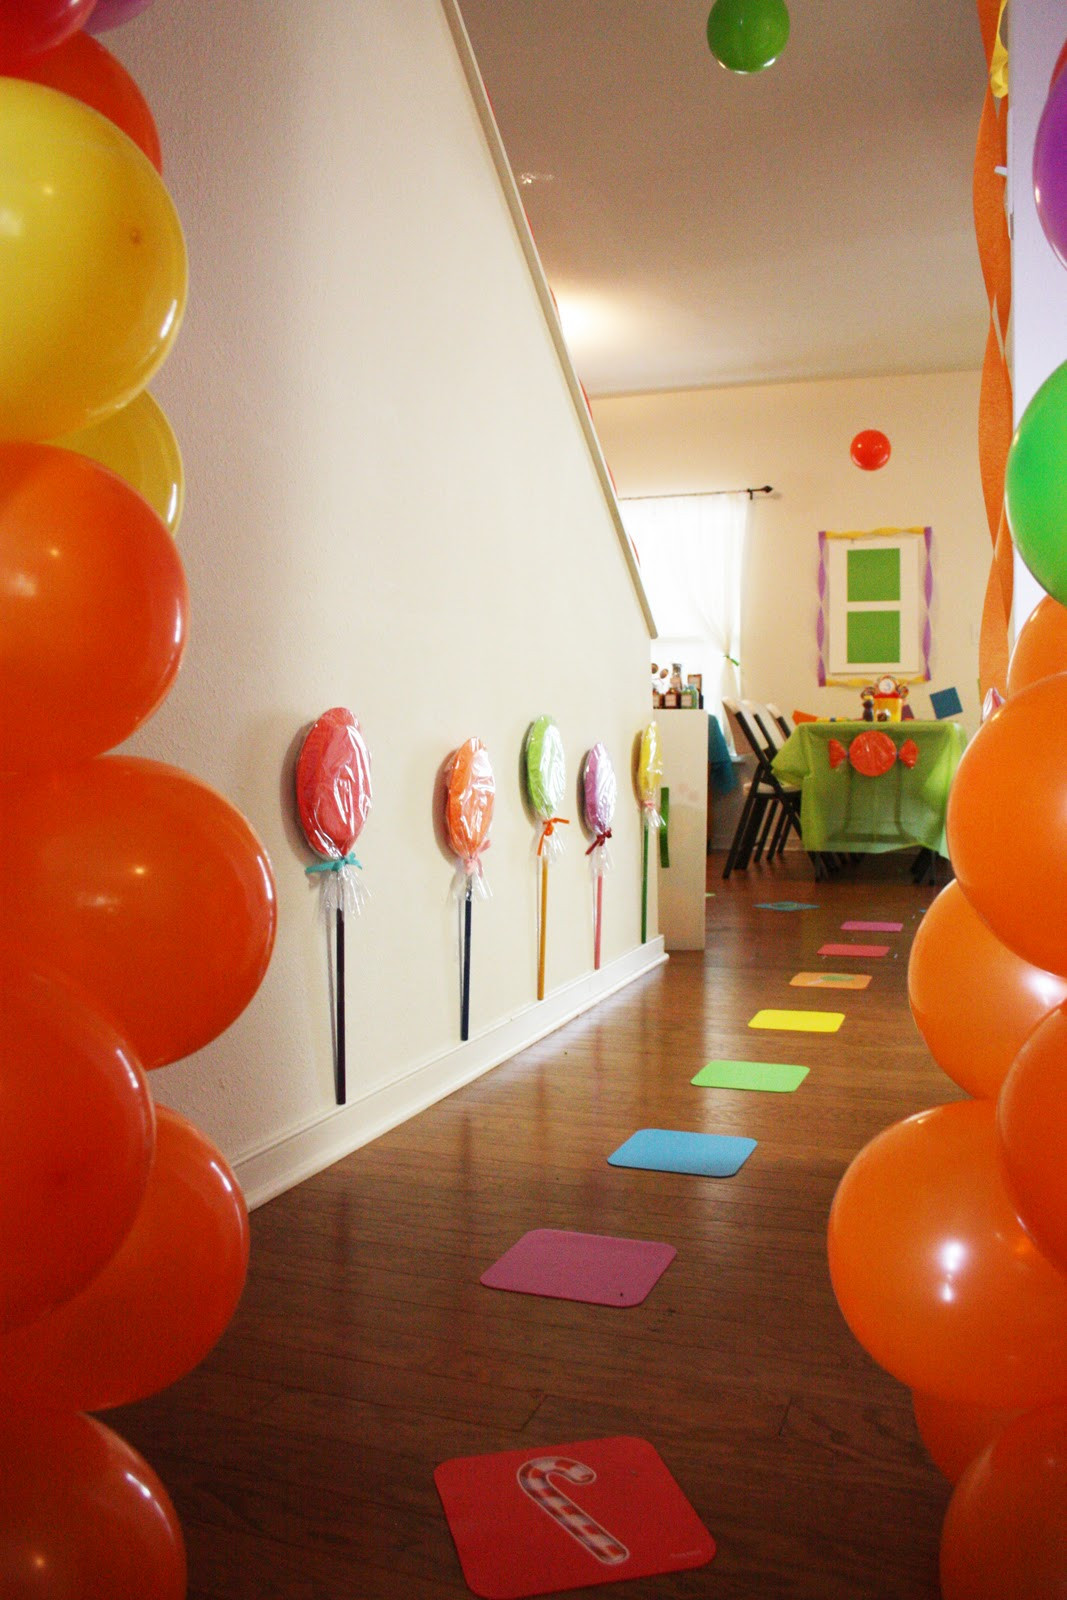 Candyland Birthday Decorations
 MBC Candyland Party